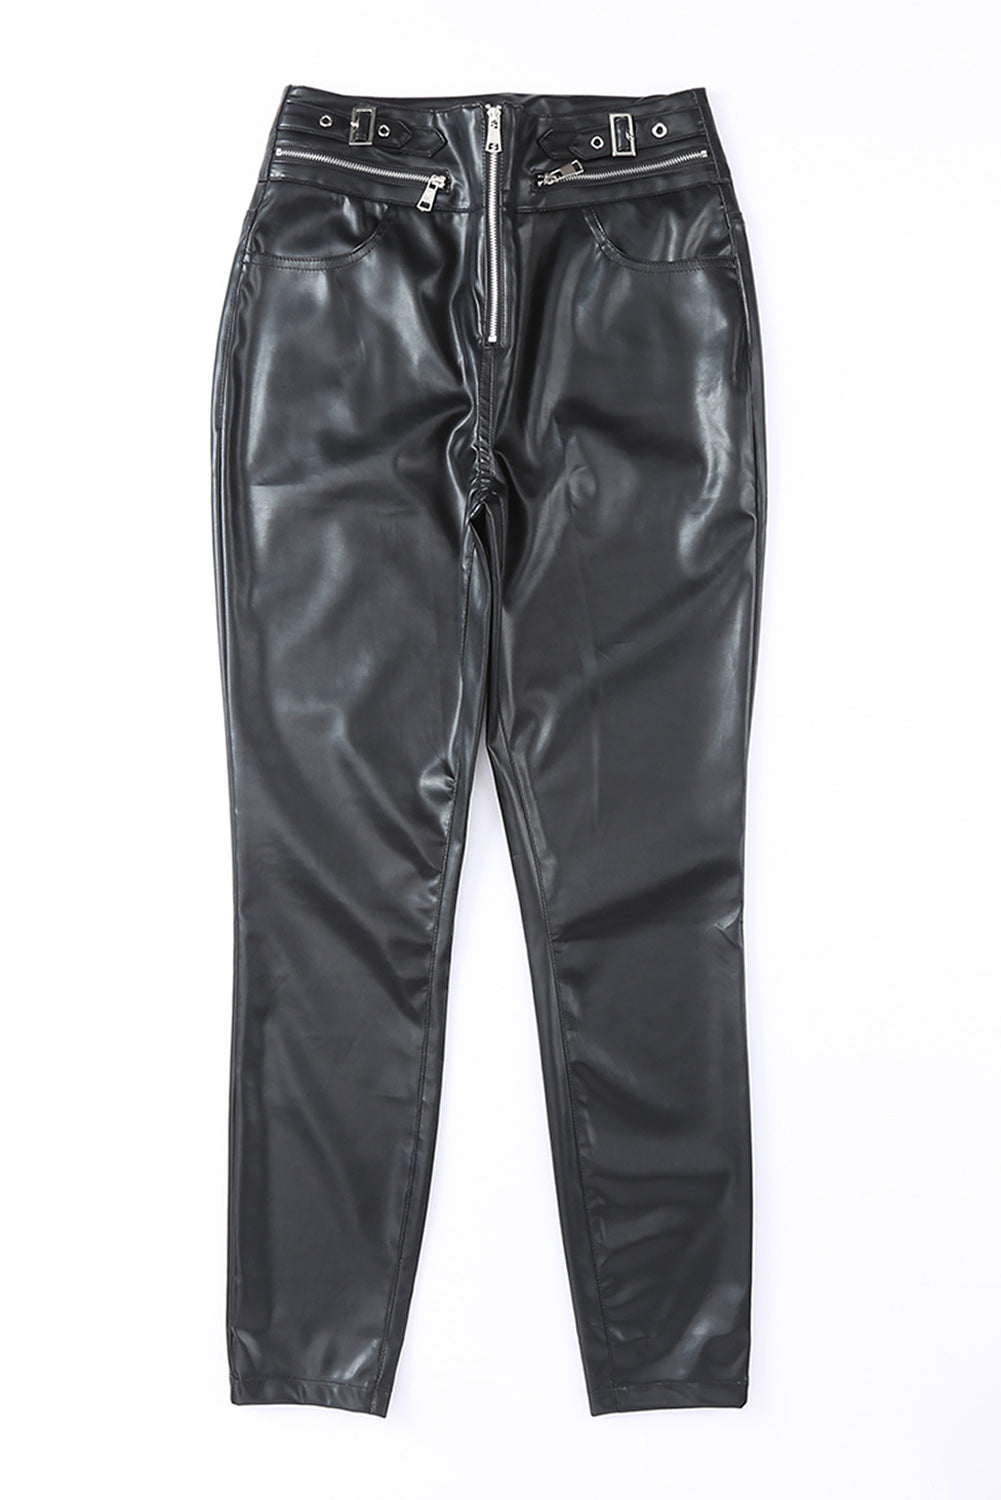 Rock Your Own Story Faux Leather Pants